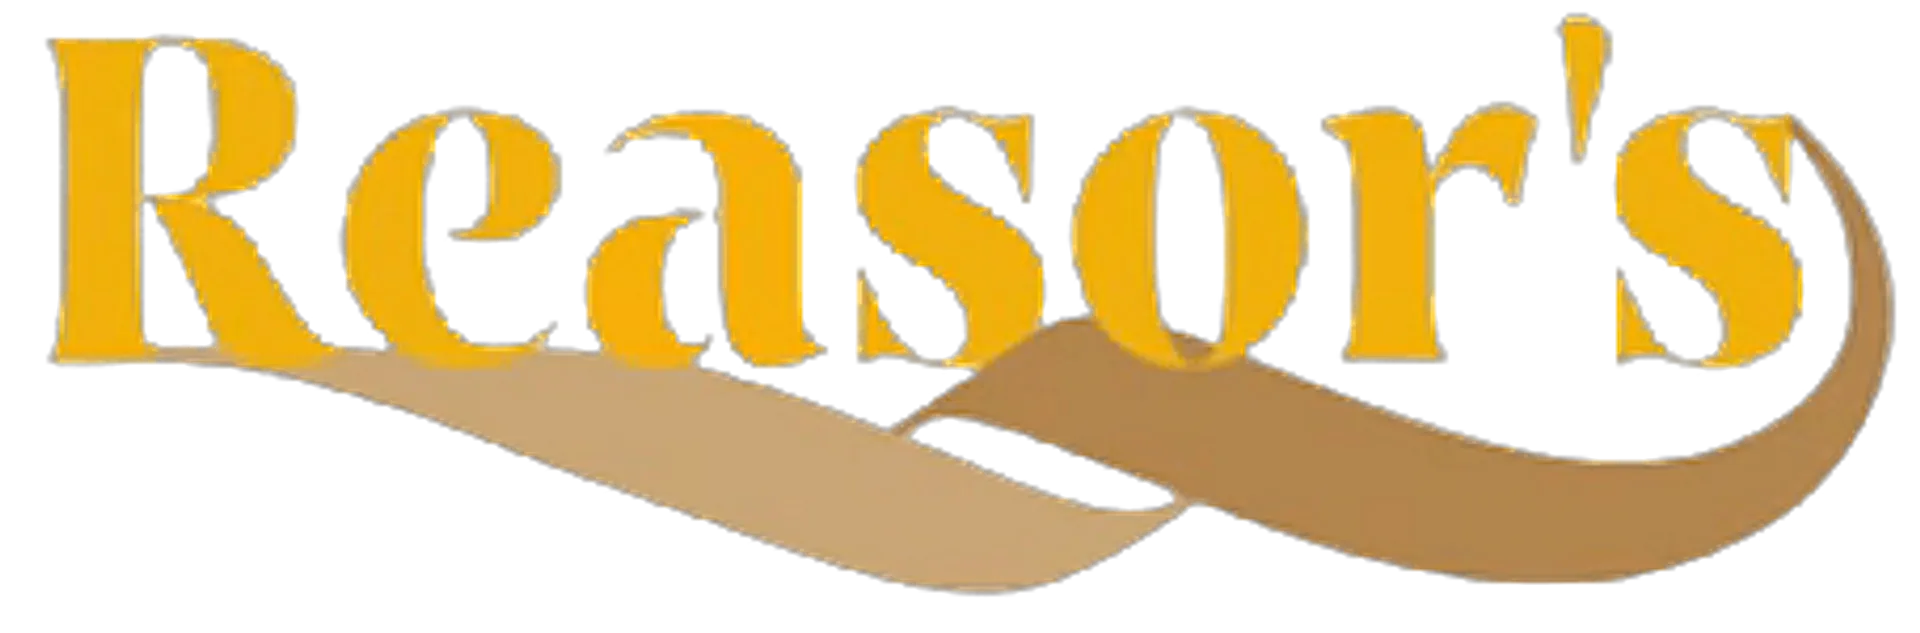 REASOR'S logo. Current weekly ad